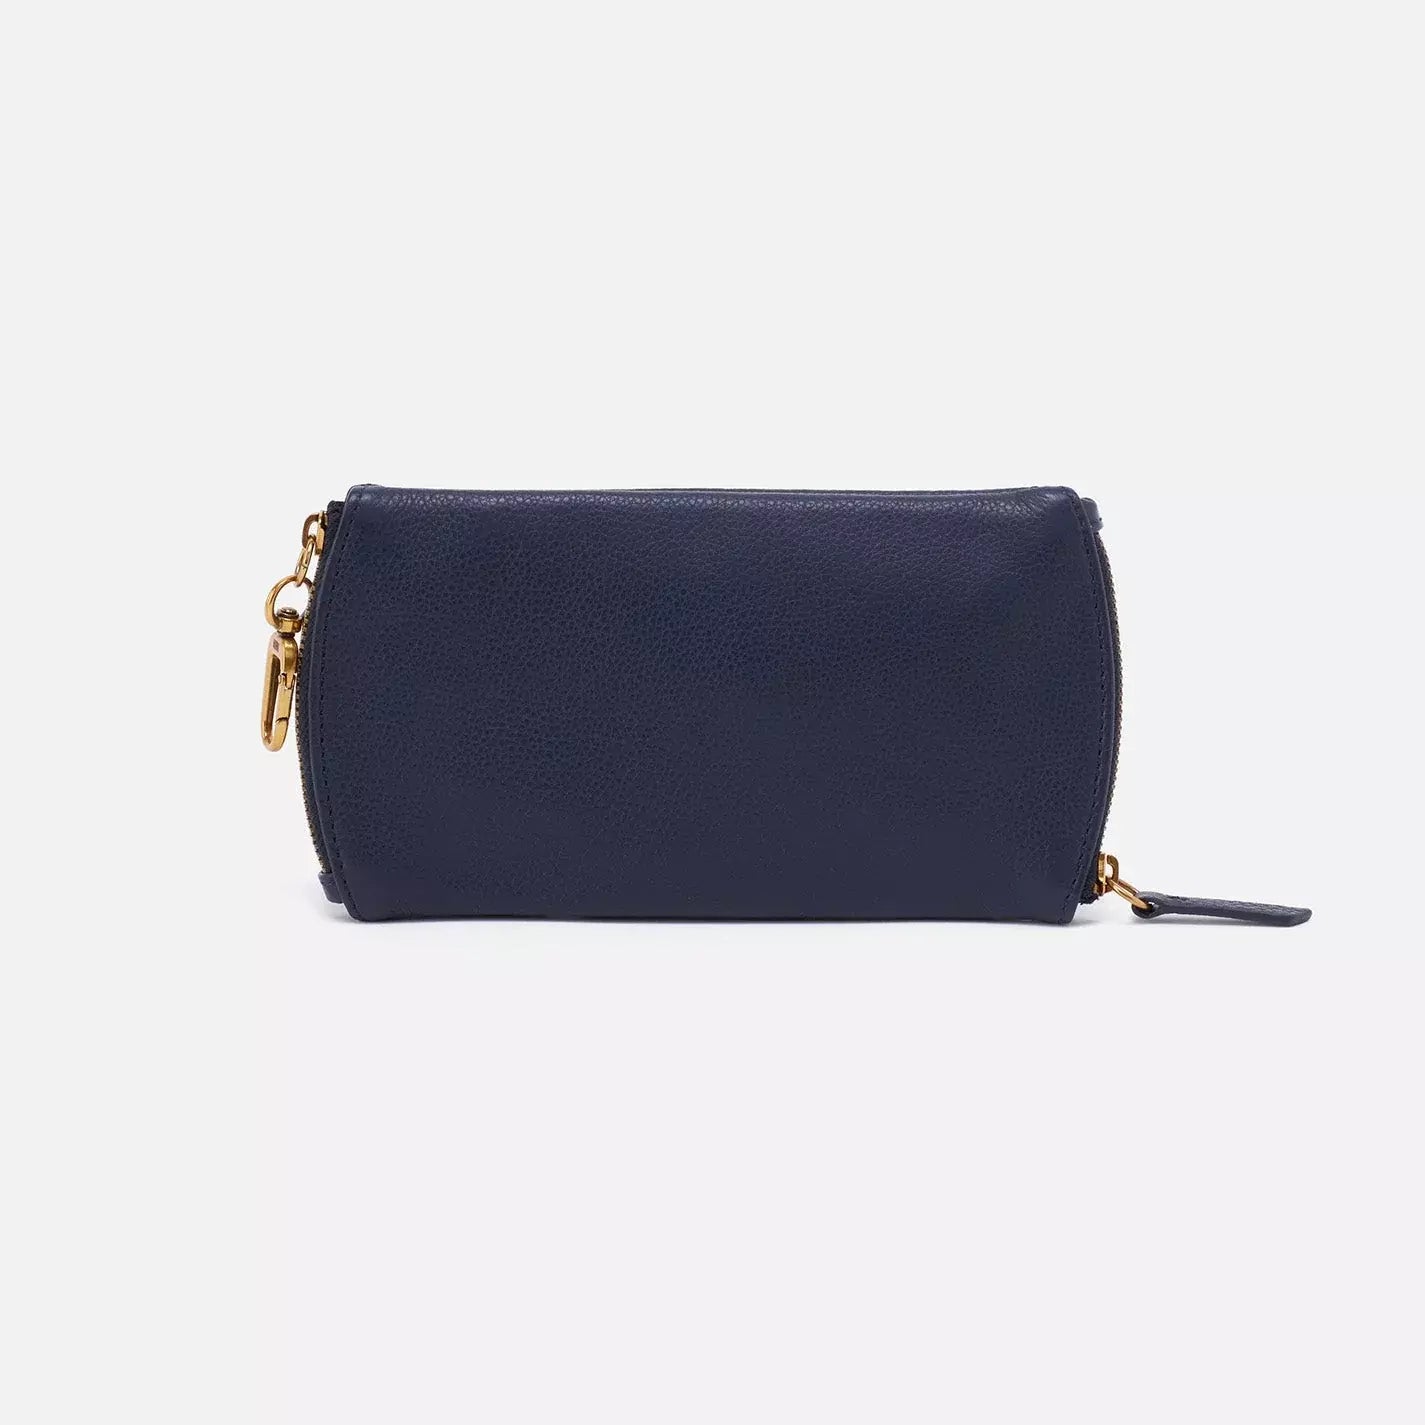 The Spark in sapphire blue is a double eyeglass case that has an easy-to-use clip for attaching to your bag and two compartments for your favorite glasses. Find it at the Painted Cottage in Edgewater, MD